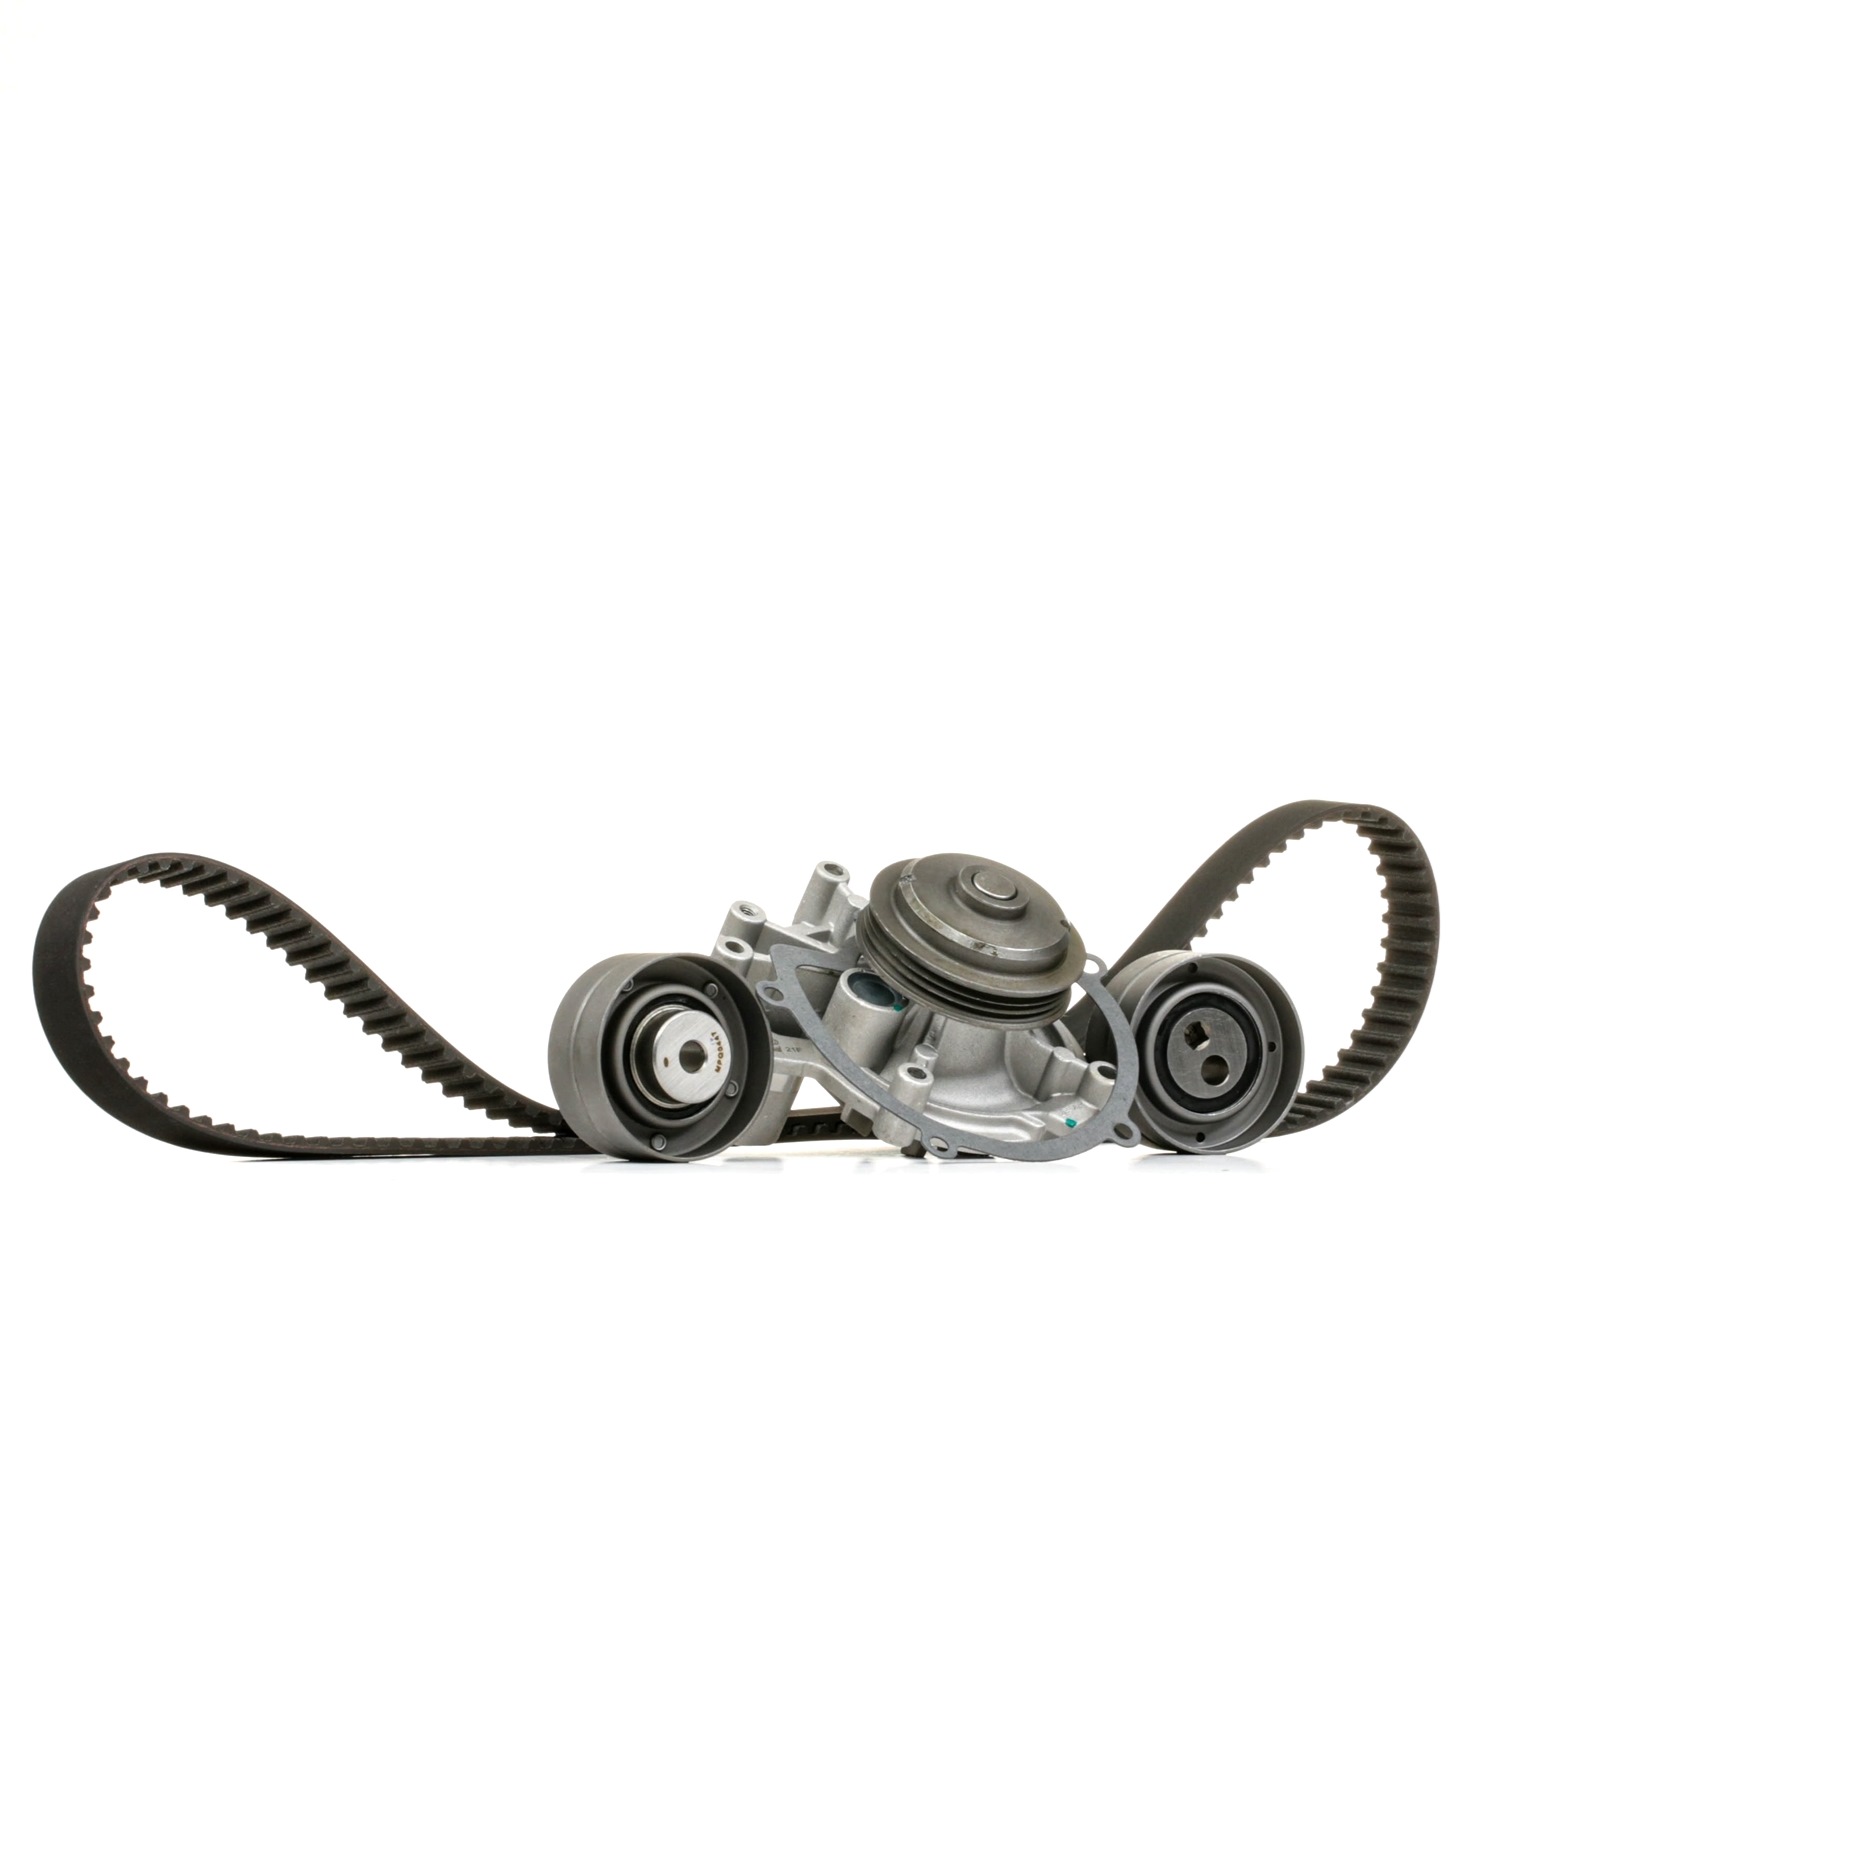 MAGNETI MARELLI 132011160004 Water pump and timing belt kit MITSUBISHI experience and price